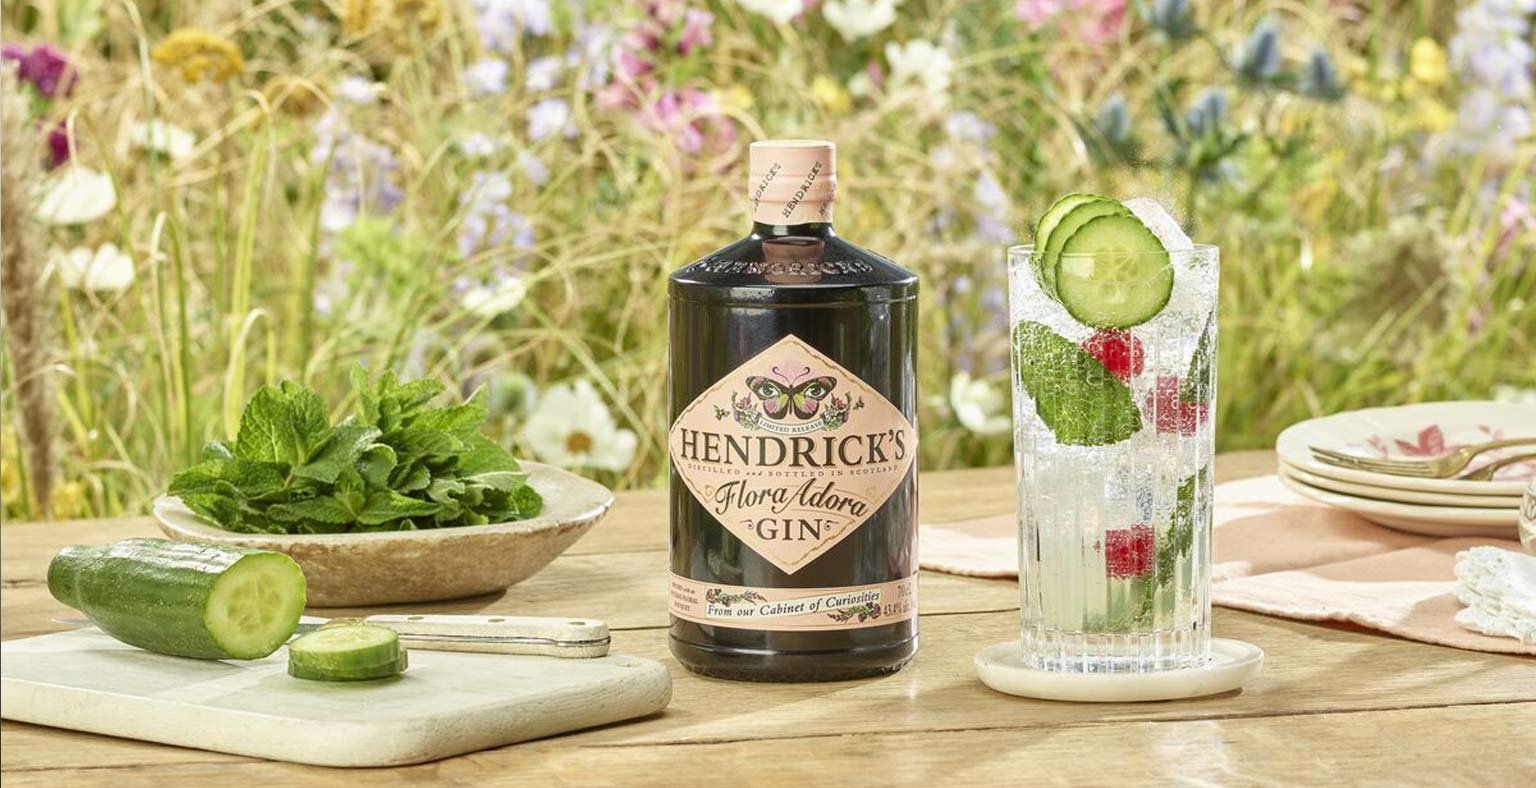 A bottle of Hendricks Flora Adora, a cocktail and garnishes on a table